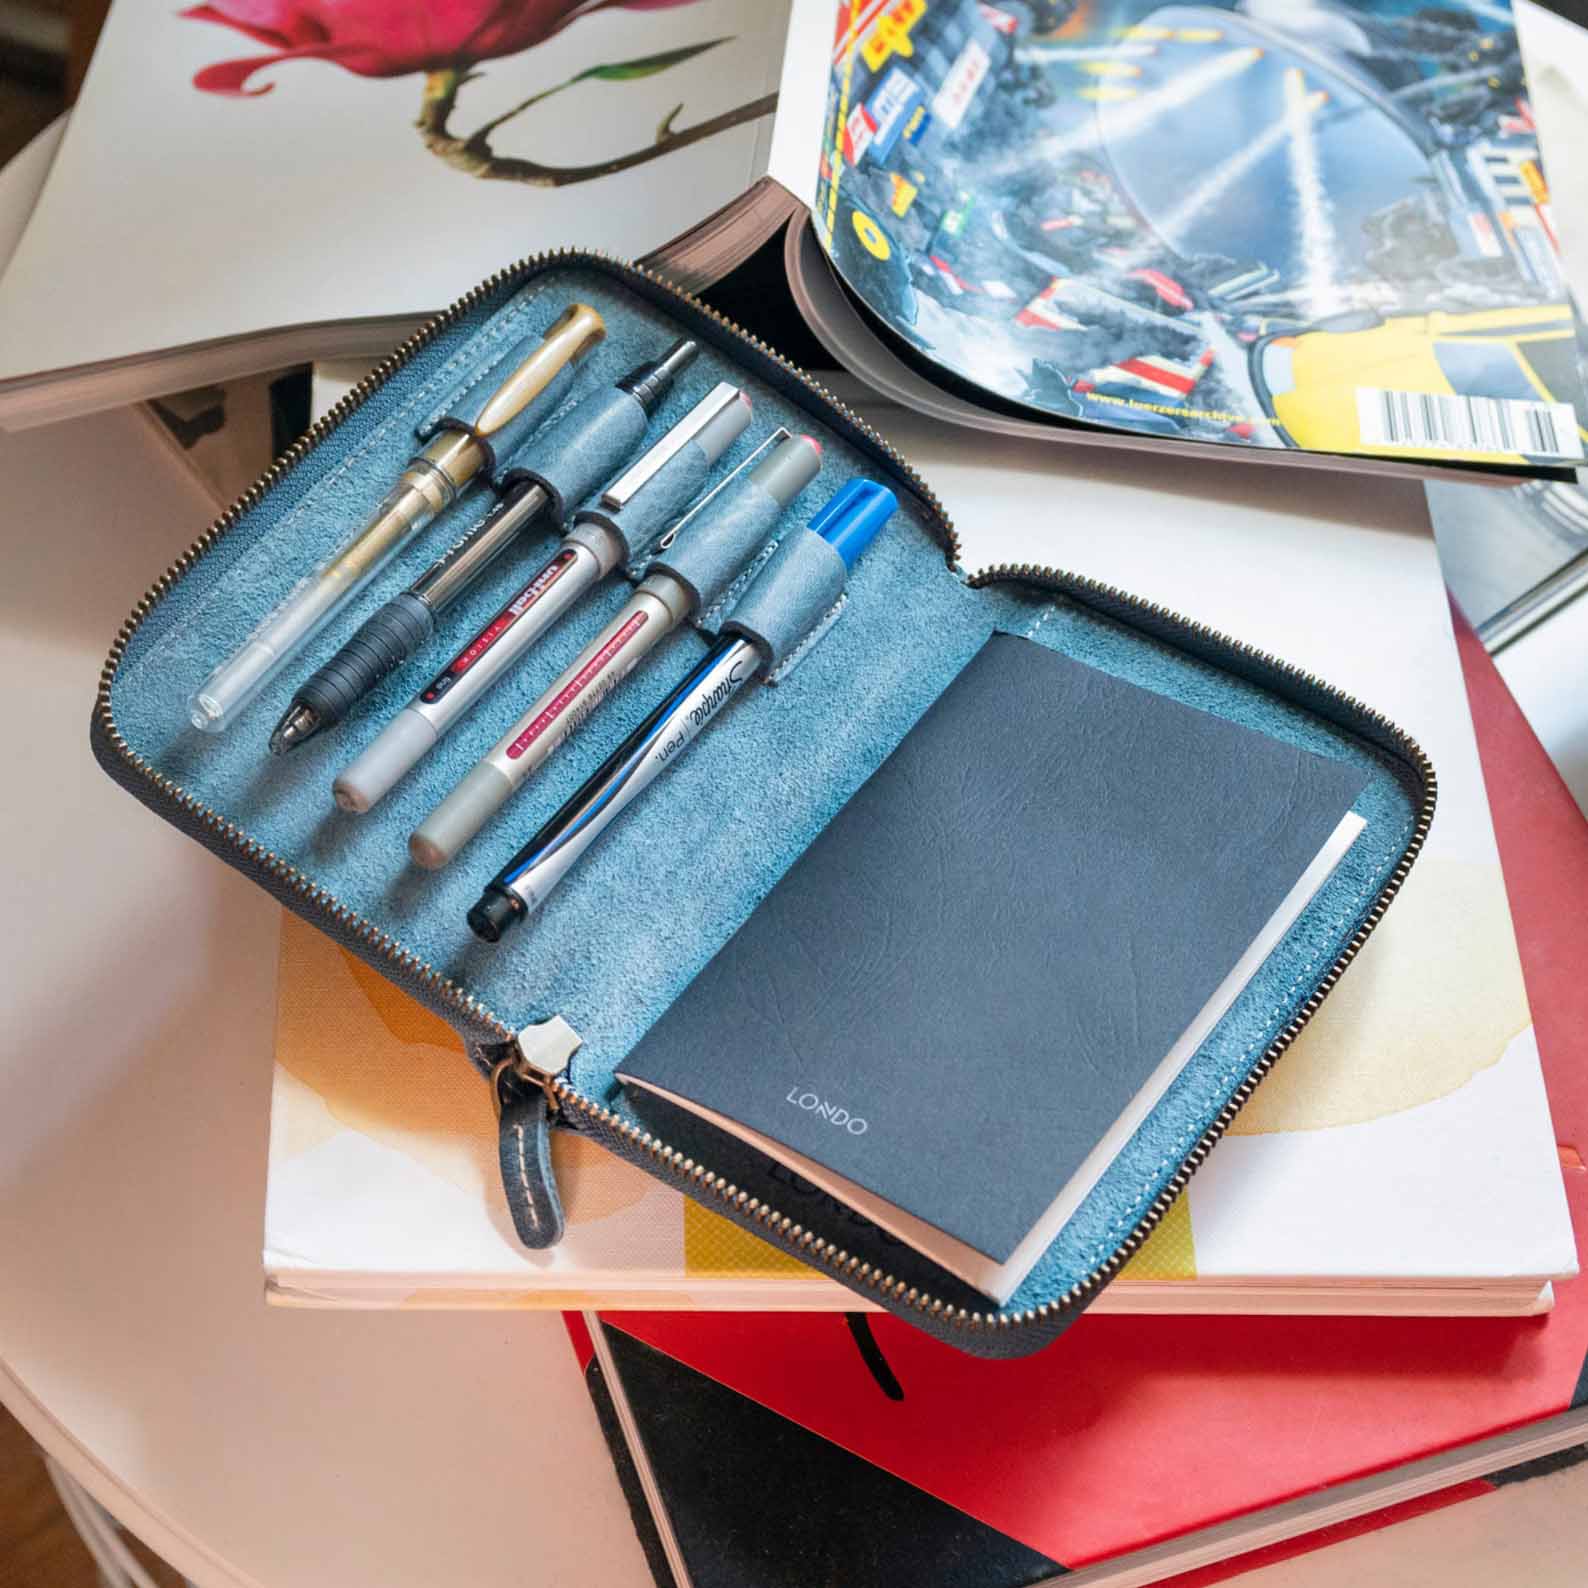 Modern Gift Idea - A hand crafted leather travel journal and organizer.